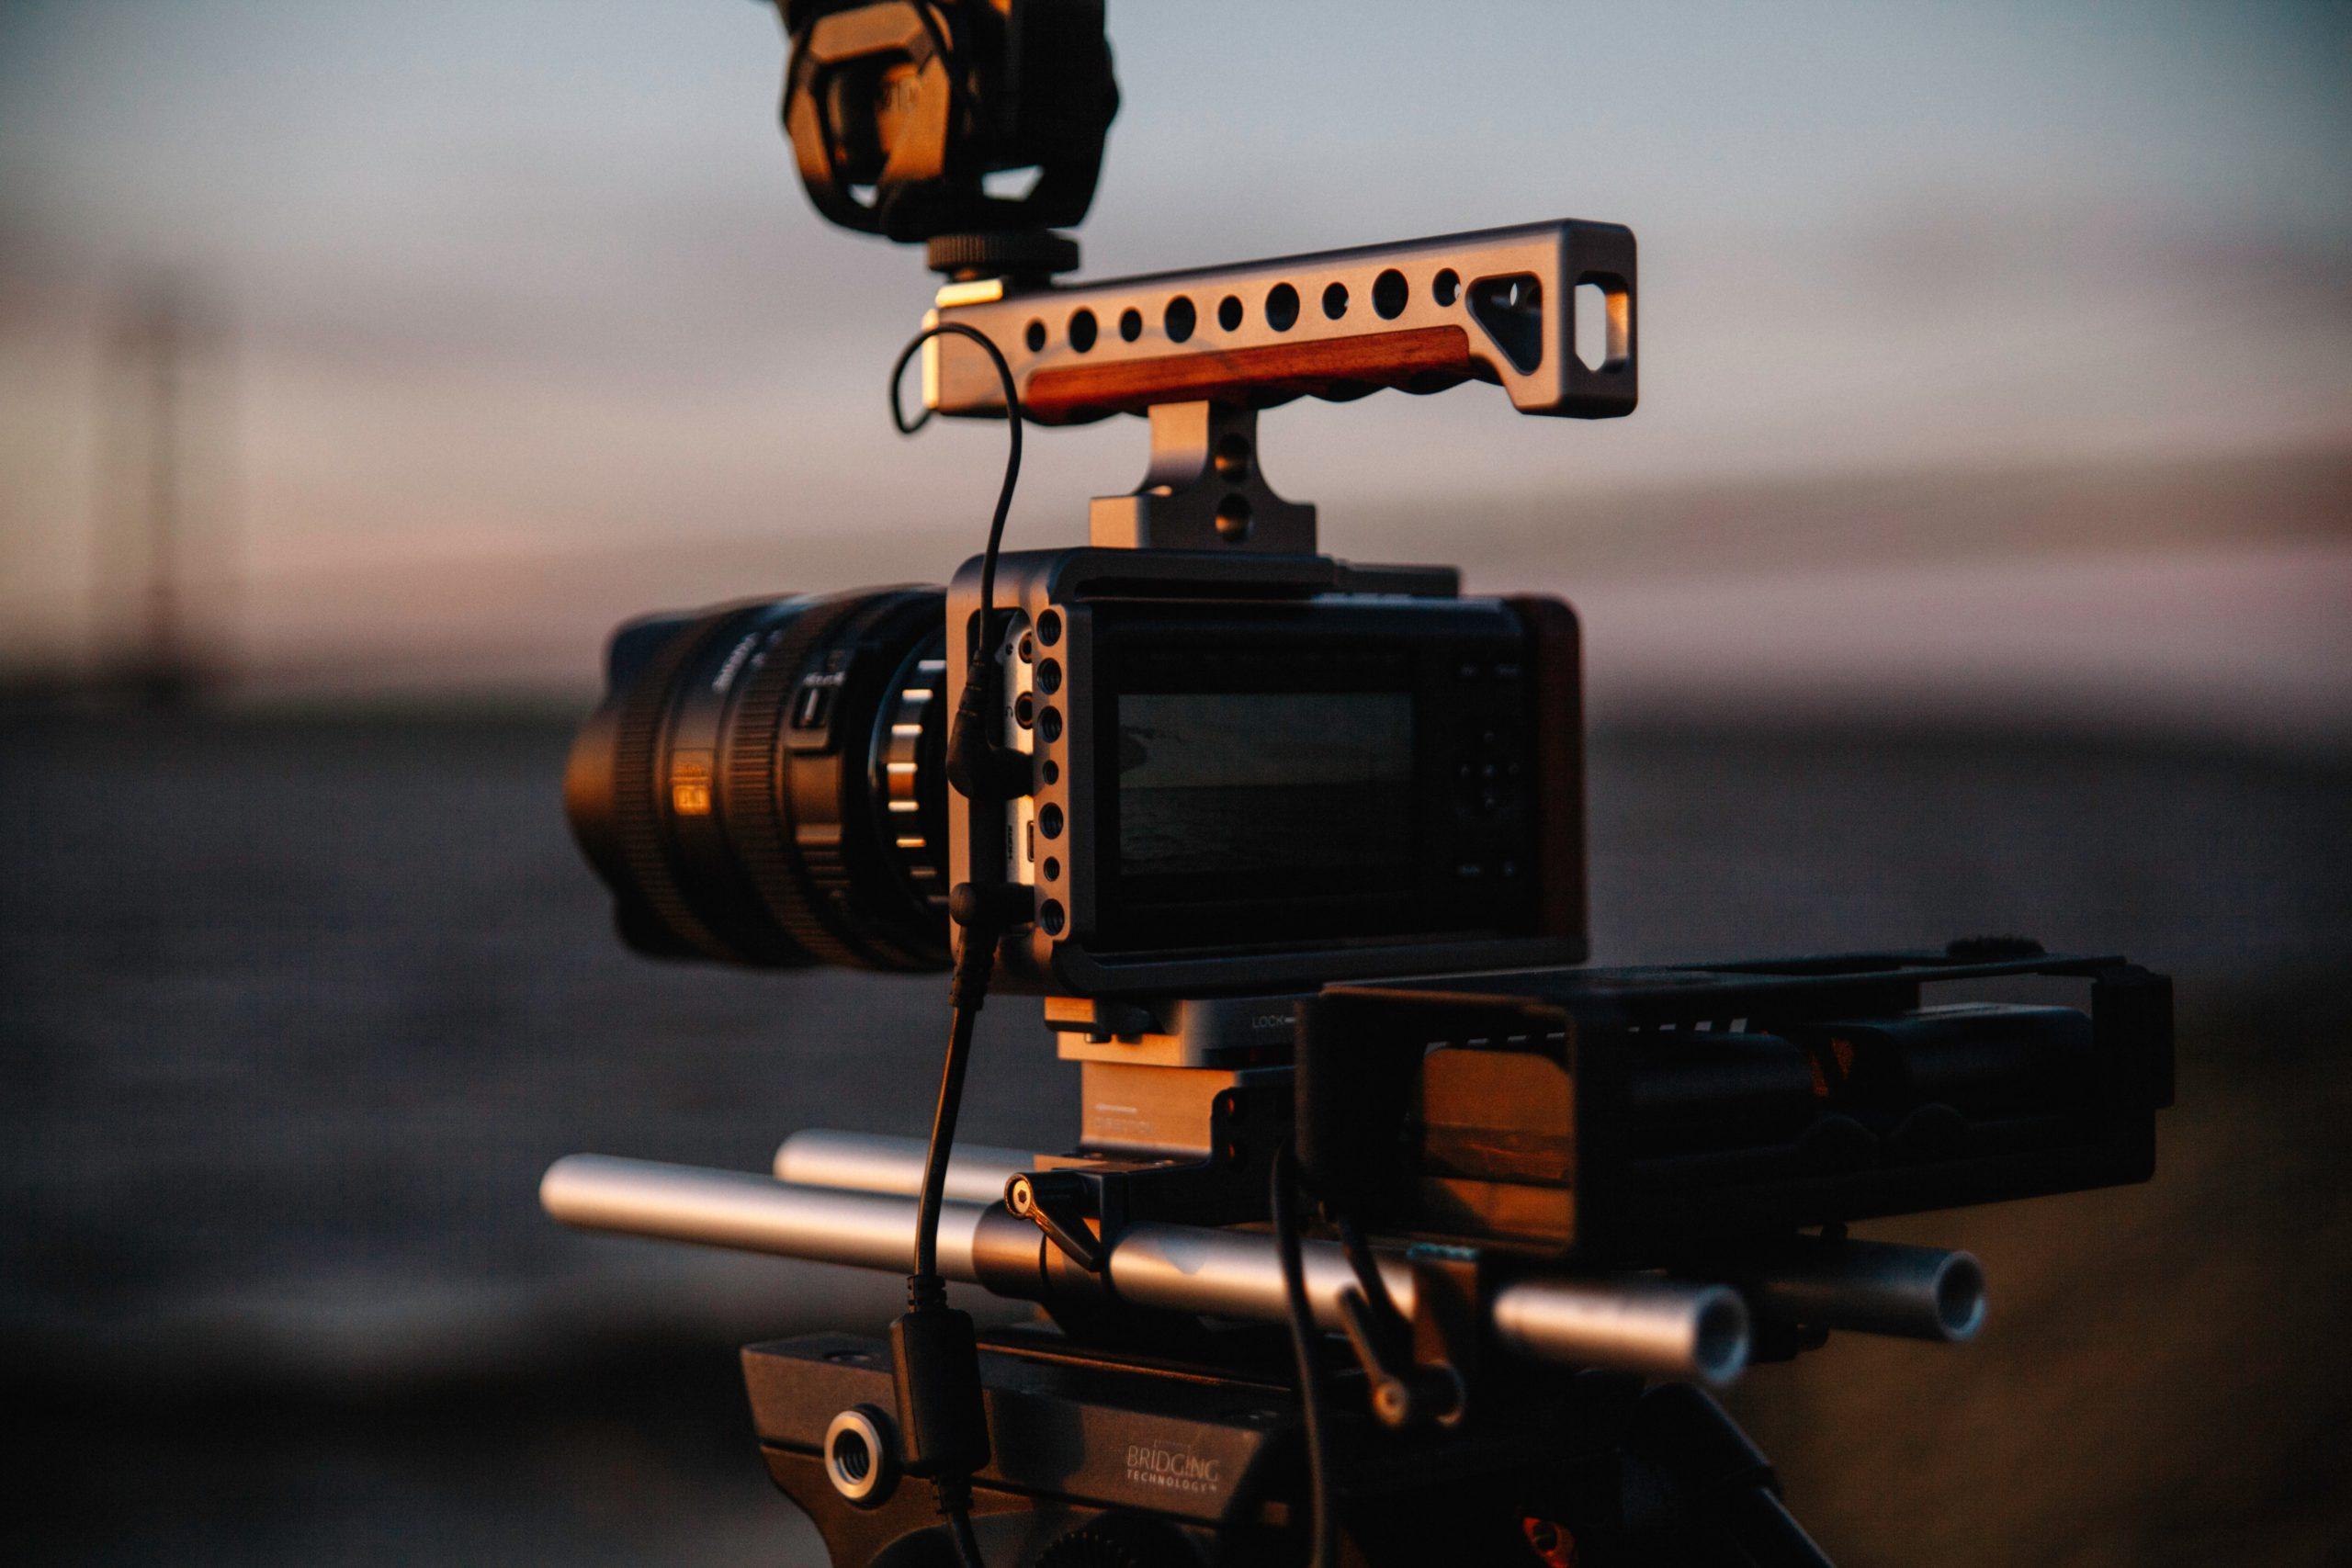 Top Promo Video Production Service In Singapore